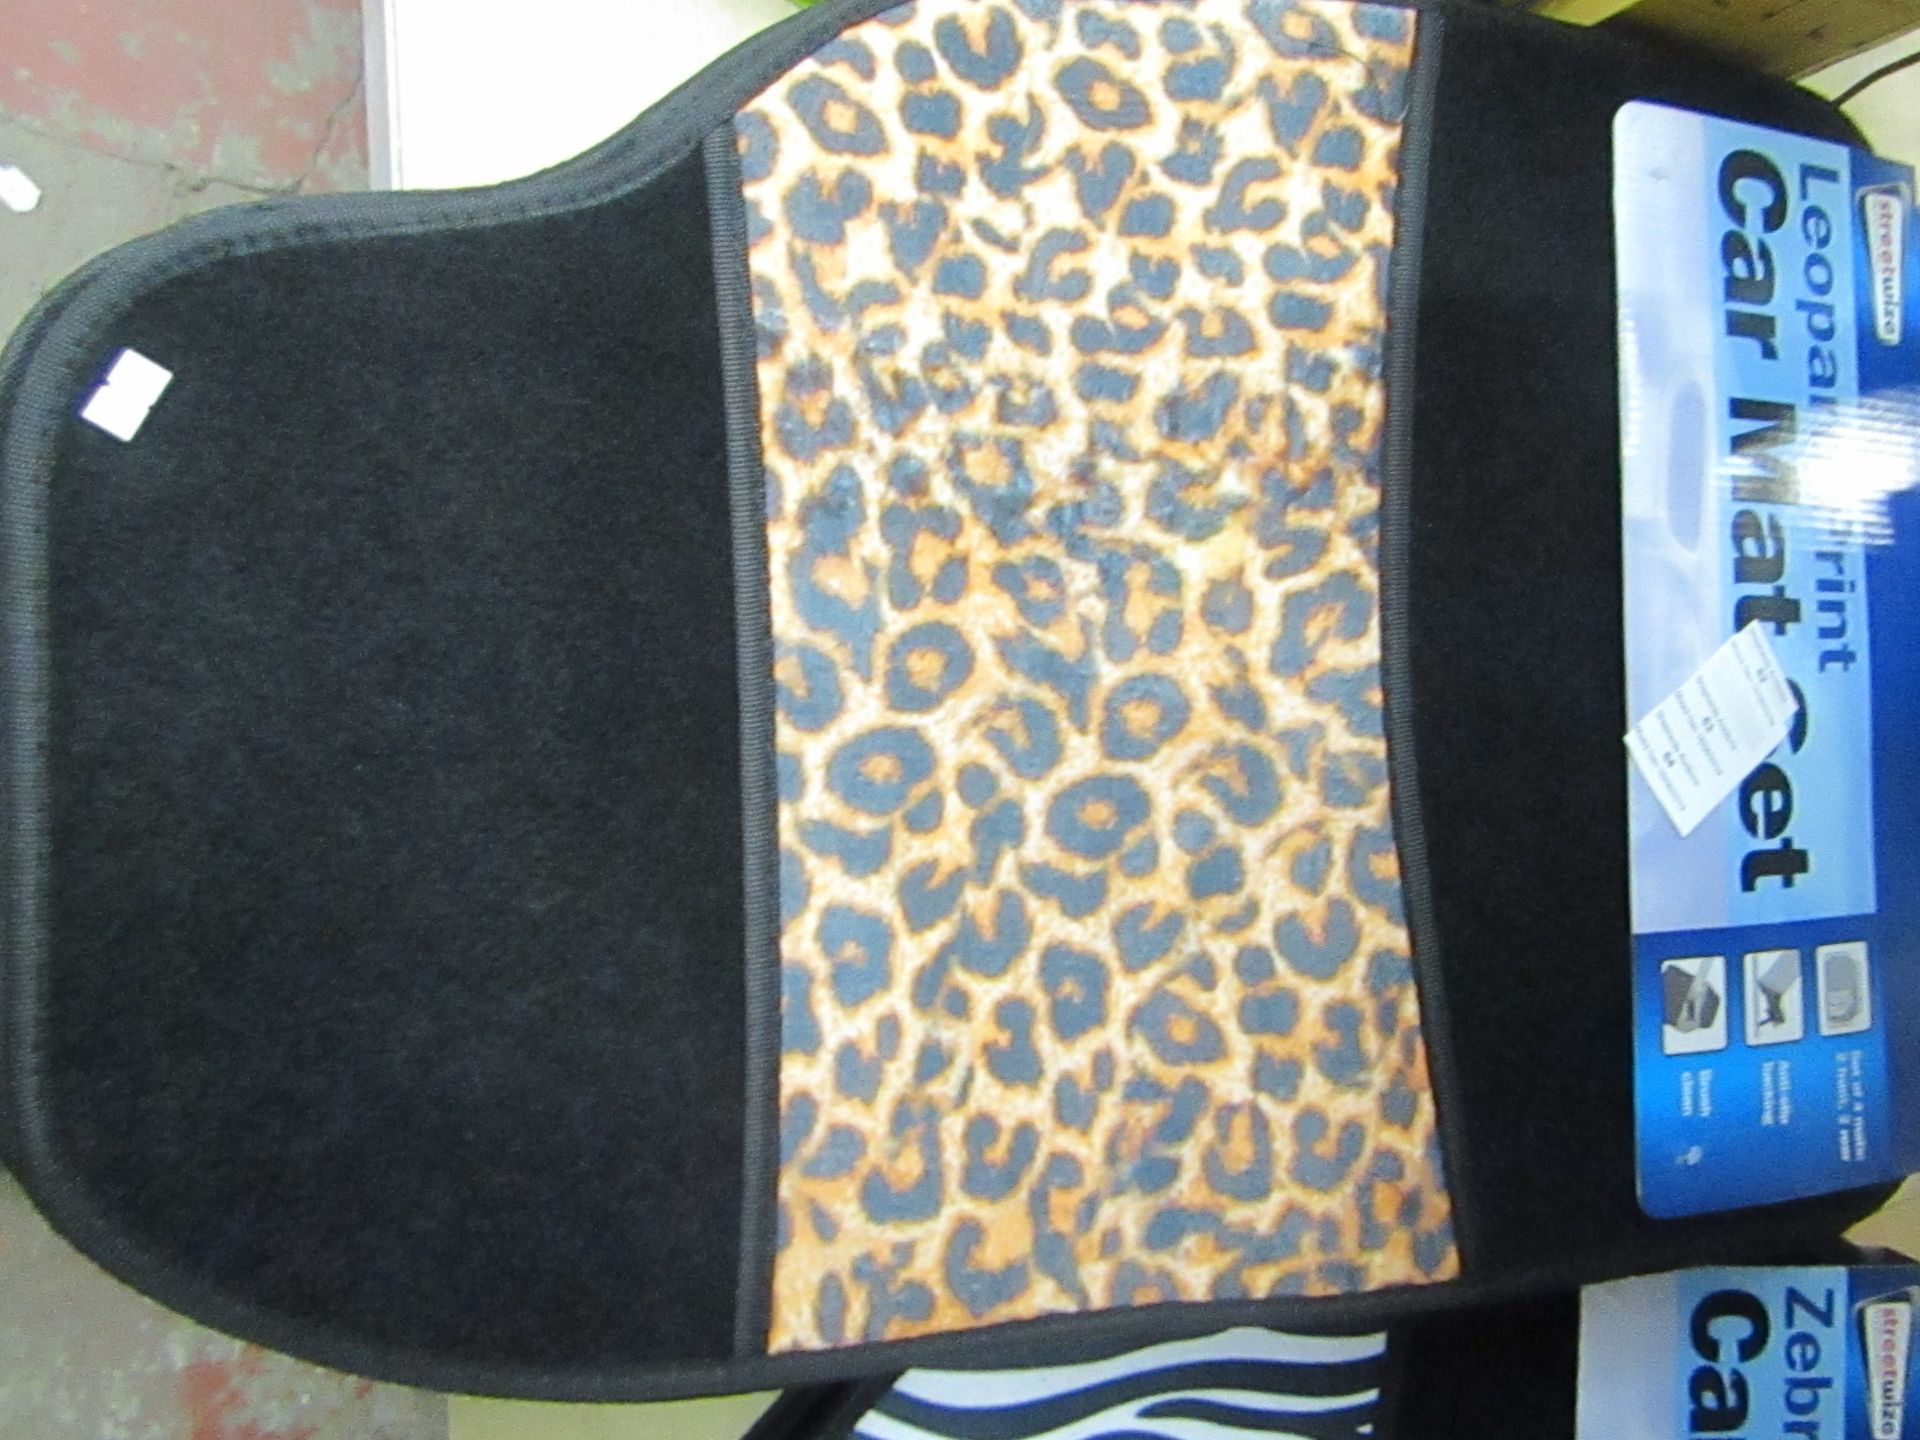 Streetwise Leopard Print 4 piece car mat set, new with POS still attached